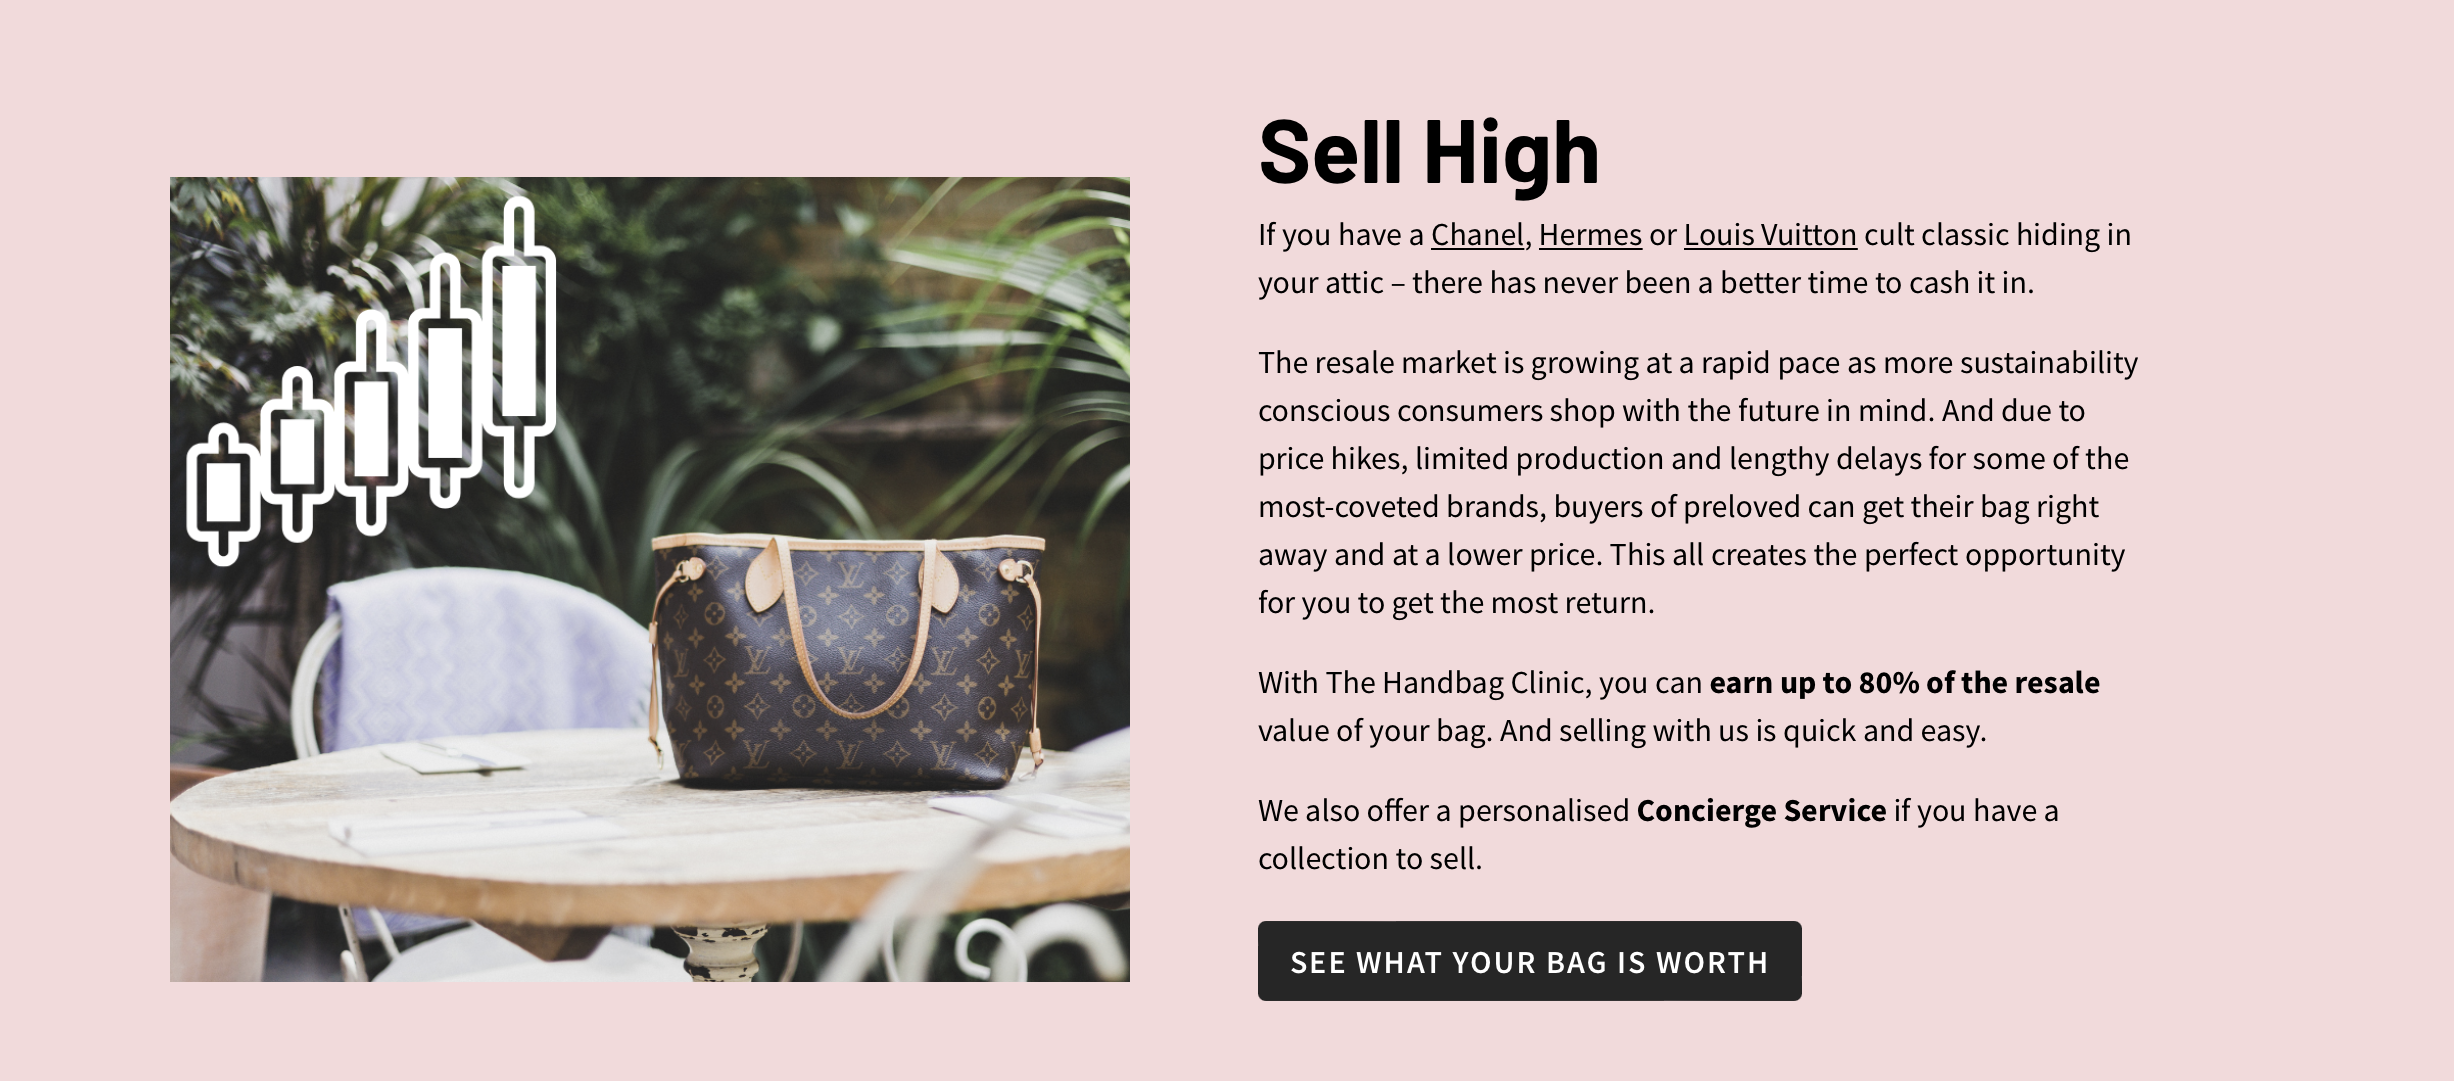 Sell your investment bags for the most money through The Handbag Clinic